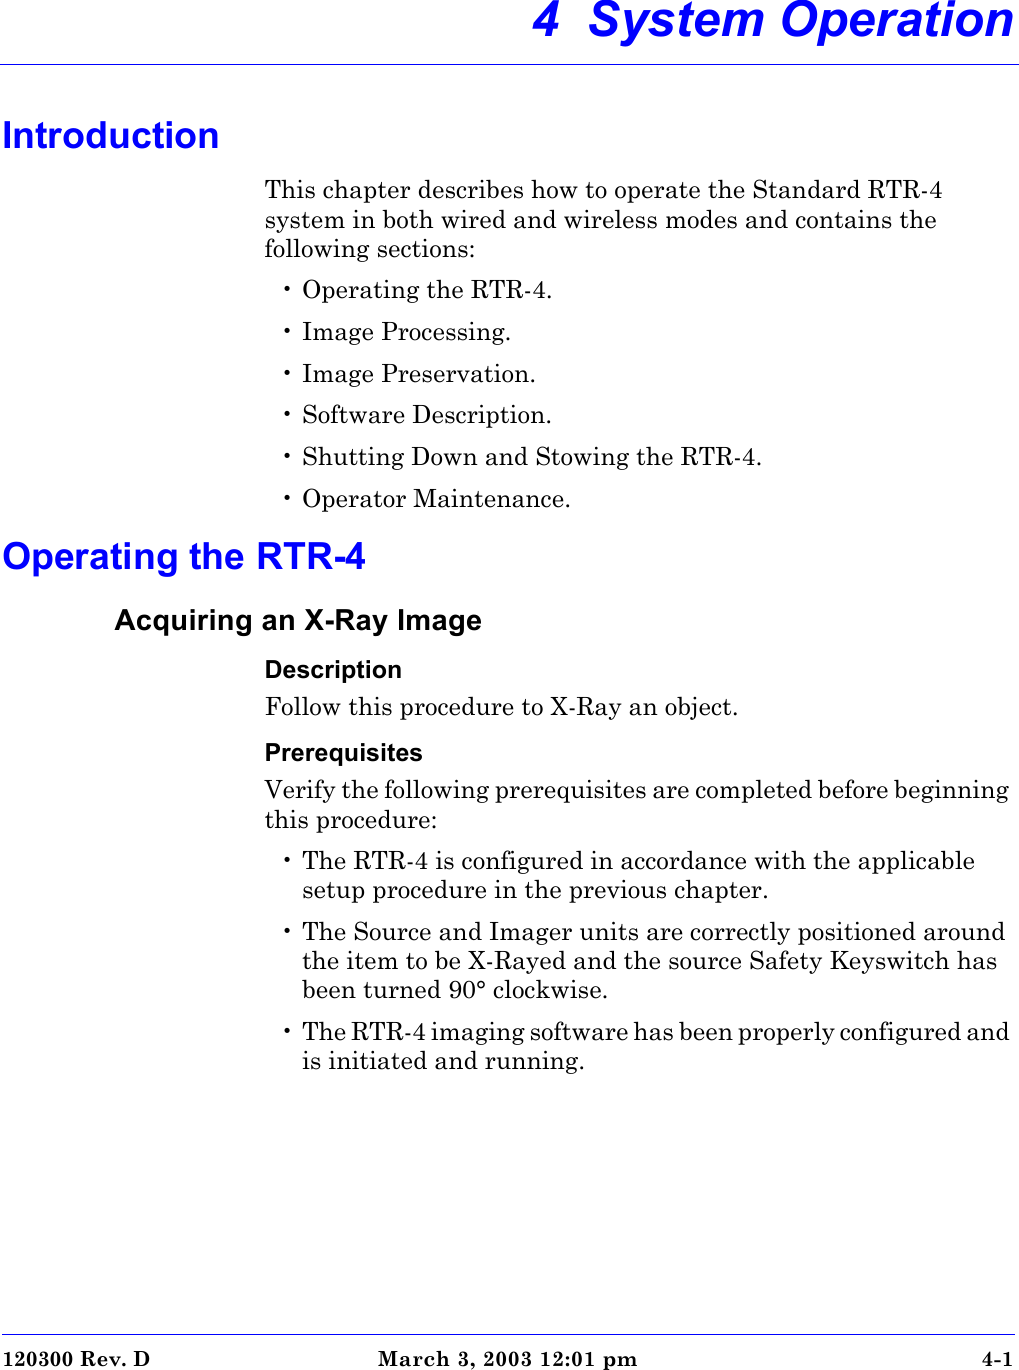 120300 Rev. D March 3, 2003 12:01 pm 4-14  System OperationIntroductionThis chapter describes how to operate the Standard RTR-4 system in both wired and wireless modes and contains the following sections:• Operating the RTR-4.• Image Processing.• Image Preservation.• Software Description.• Shutting Down and Stowing the RTR-4.• Operator Maintenance.Operating the RTR-4Acquiring an X-Ray ImageDescriptionFollow this procedure to X-Ray an object.PrerequisitesVerify the following prerequisites are completed before beginning this procedure: • The RTR-4 is configured in accordance with the applicable setup procedure in the previous chapter.• The Source and Imager units are correctly positioned around the item to be X-Rayed and the source Safety Keyswitch has been turned 90° clockwise.• The RTR-4 imaging software has been properly configured and is initiated and running. 